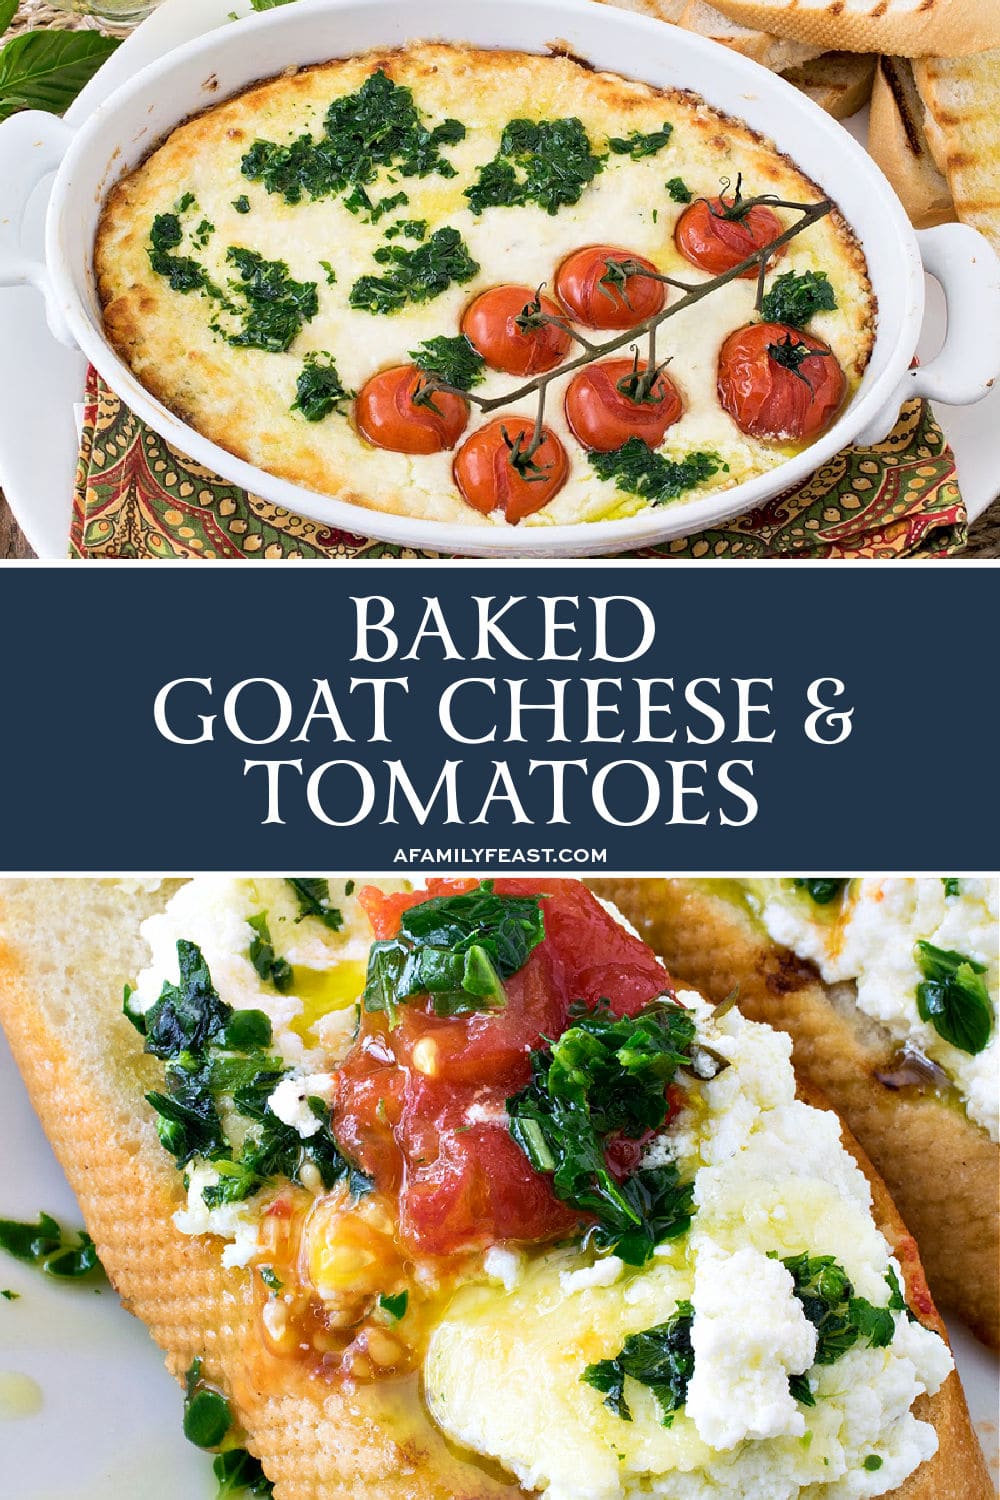 Baked Goat Cheese & Tomatoes 